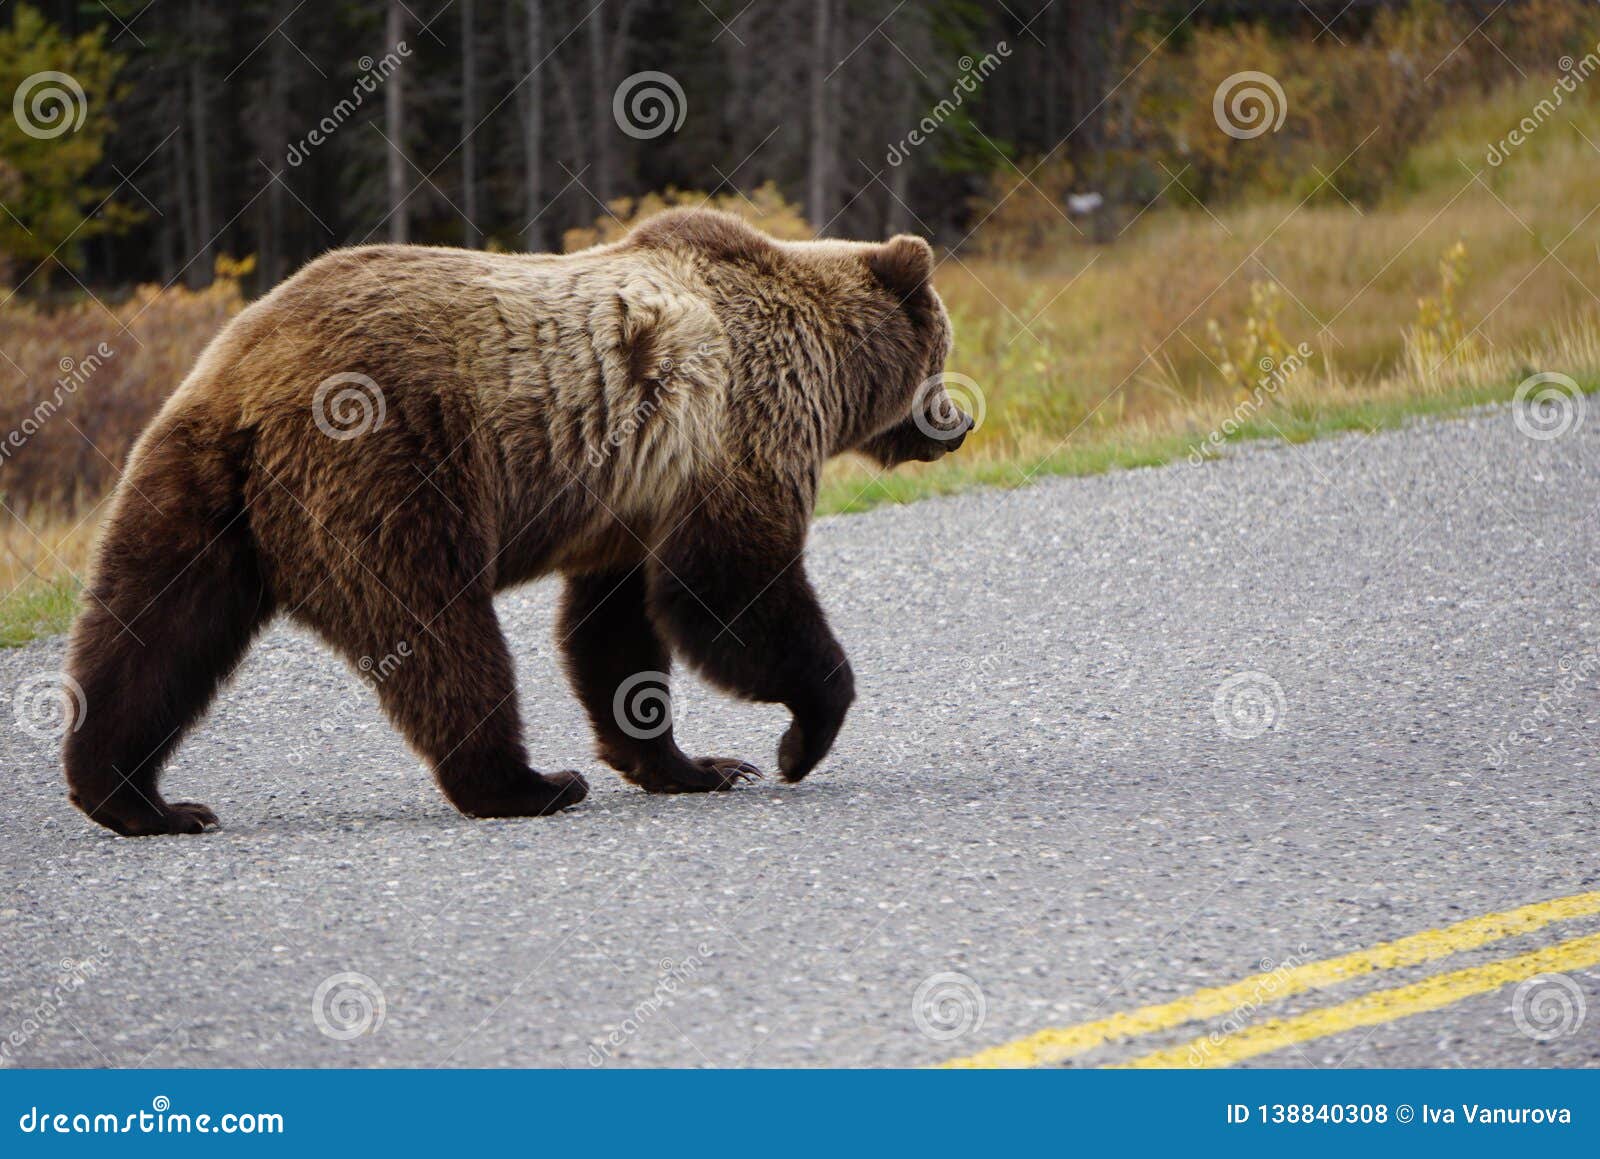 Brown Grizzly Bear in North America Stock Photo - Image of bear, north ...